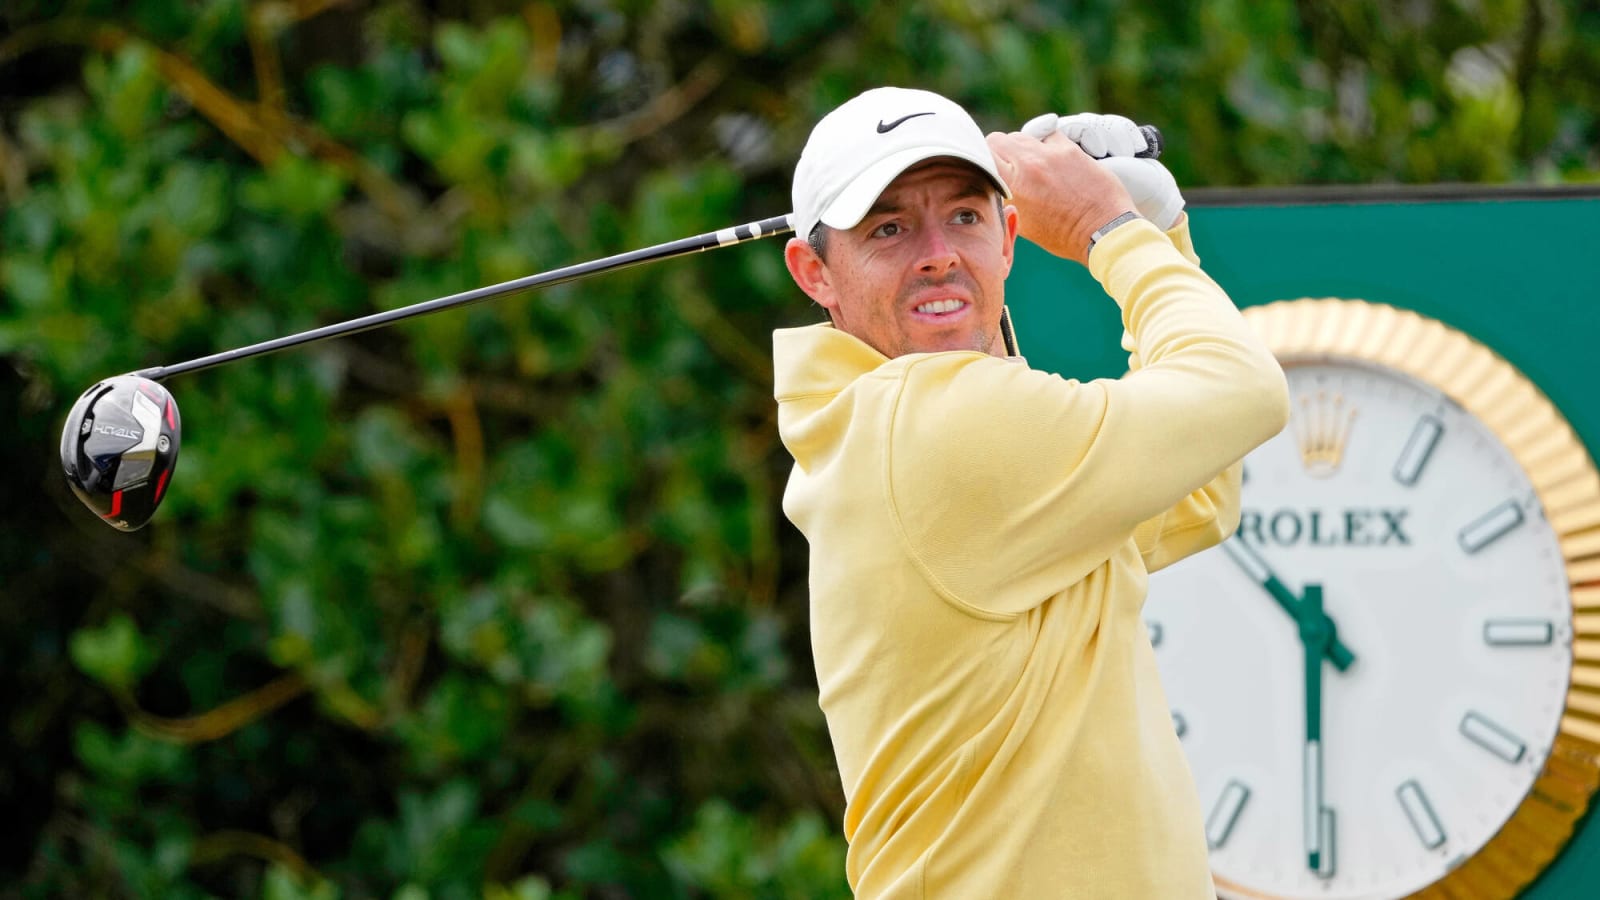 Rory McIlroy British Open odds: Rory's odds slashed after going low in round 1 of The Open